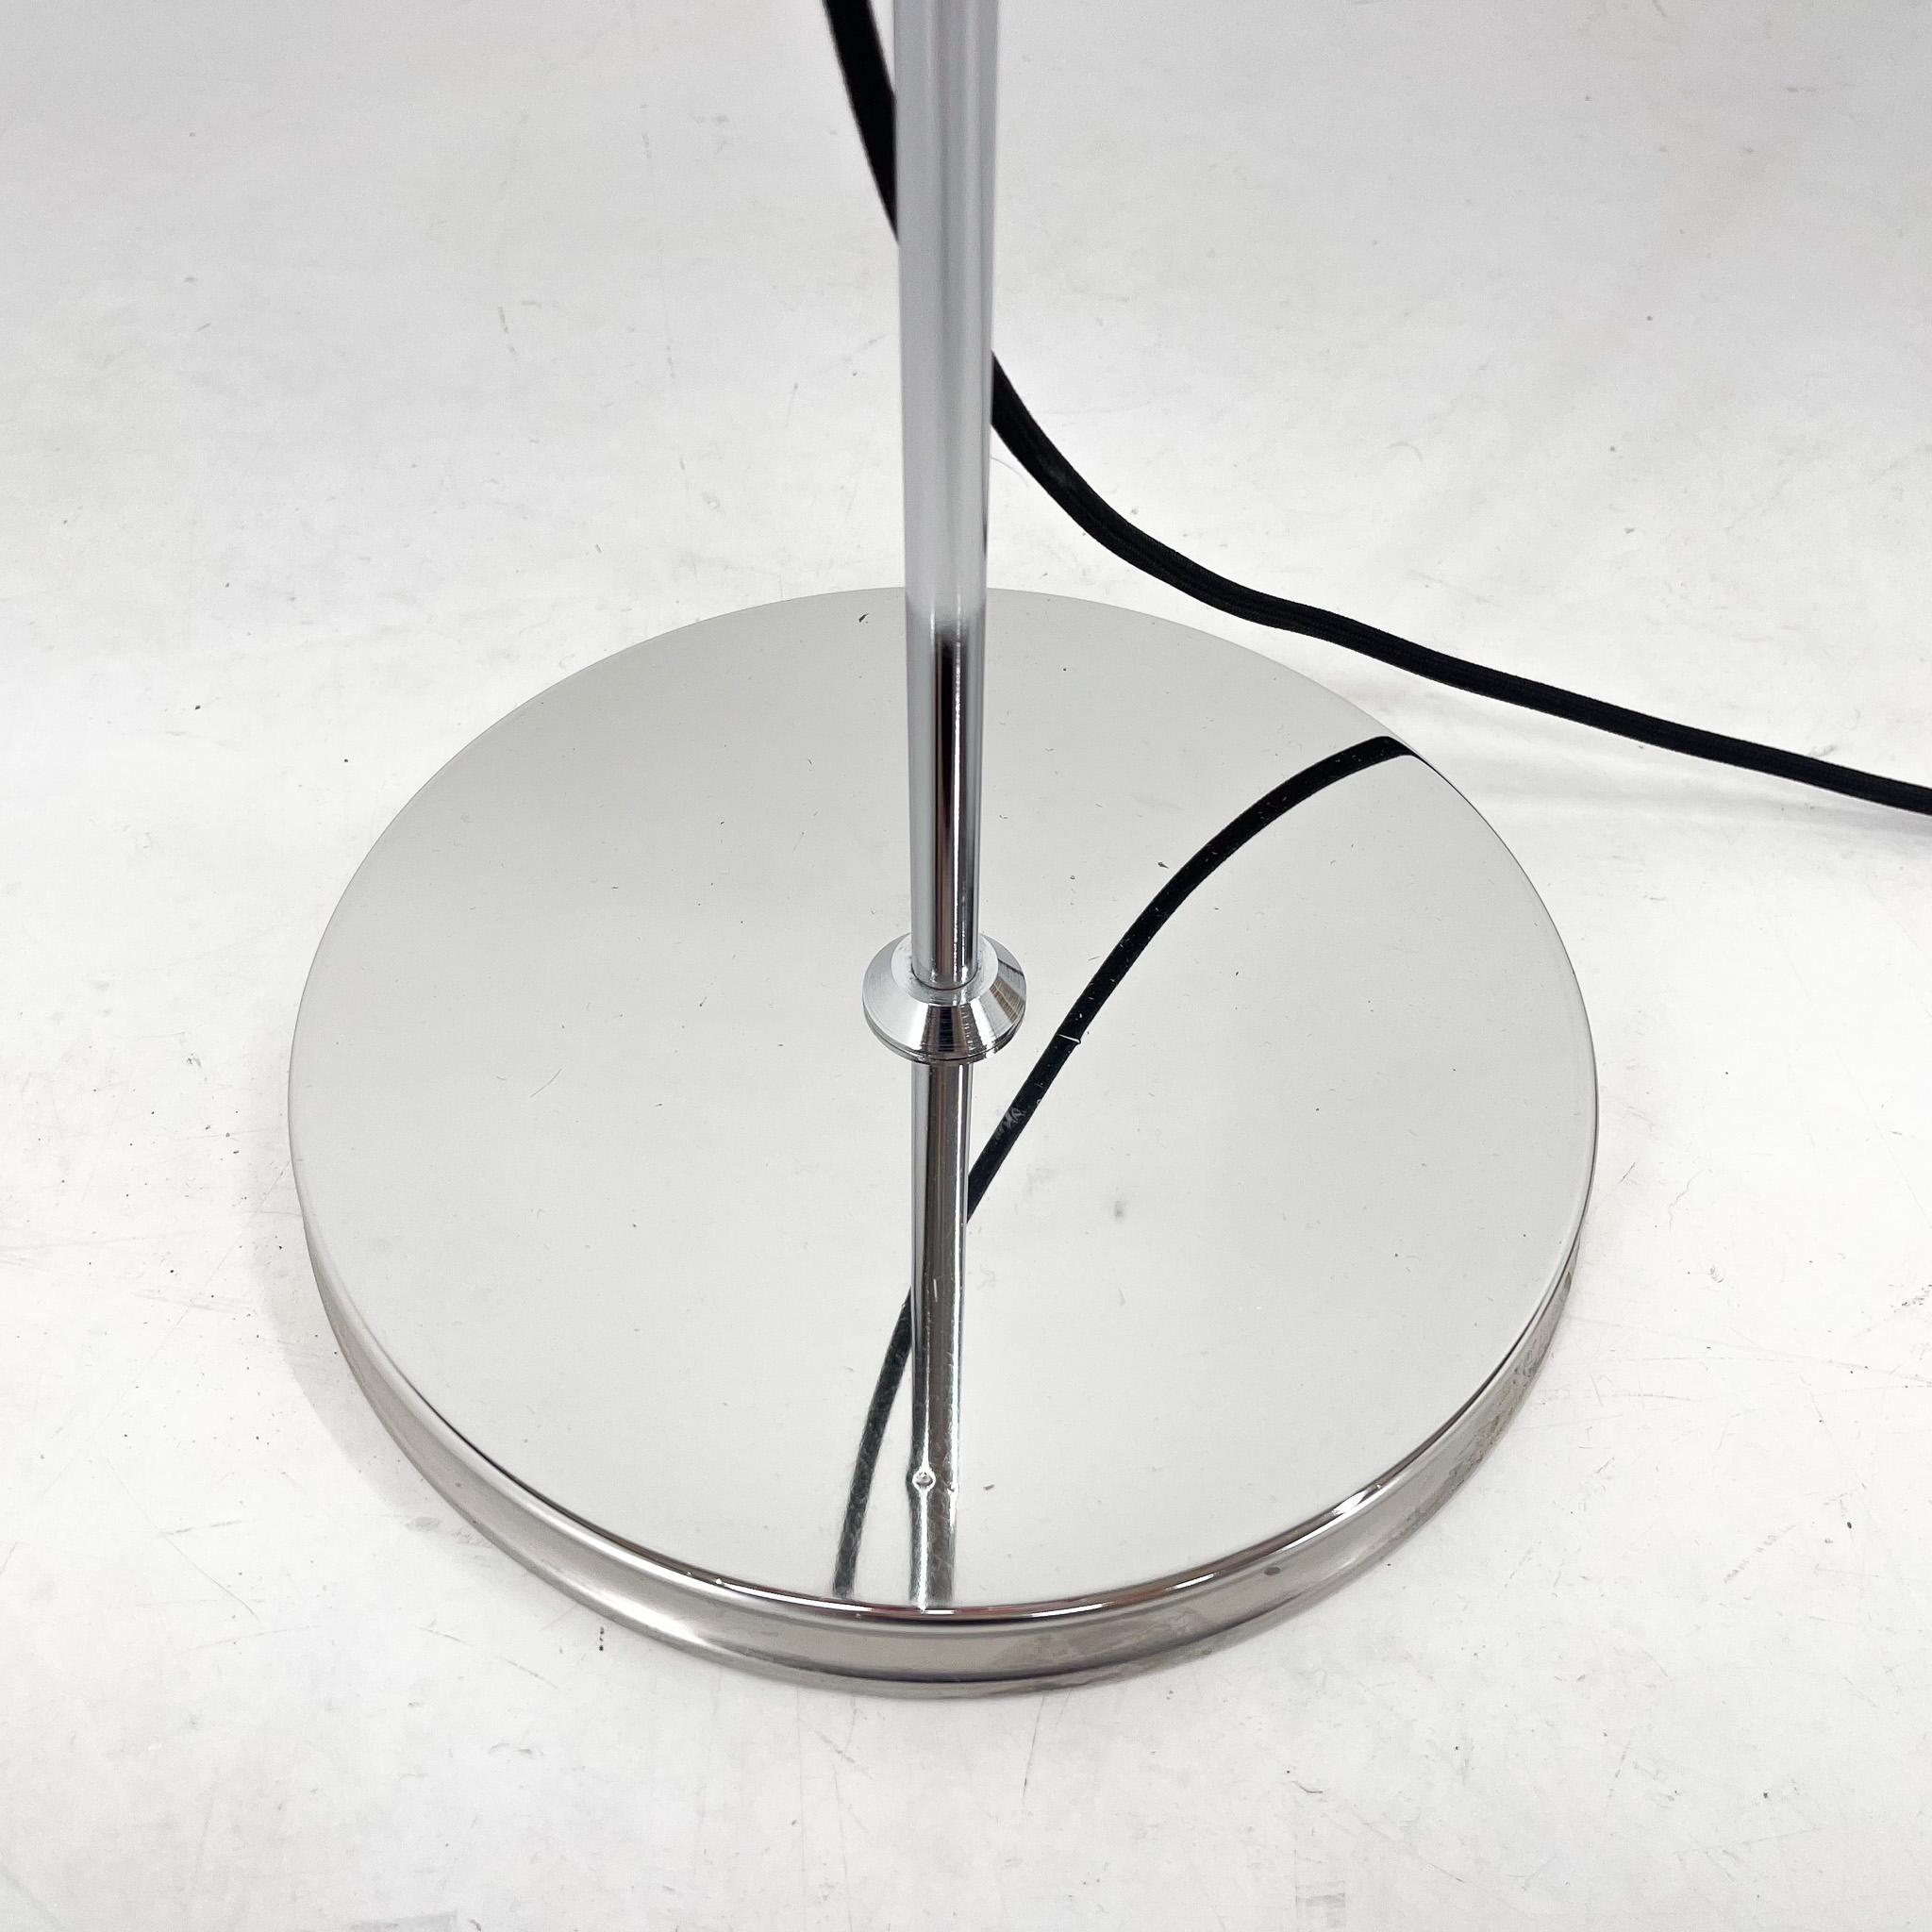 1970s Adjustable Floor Lamp Designed by Guzzini for Meblo, Italy  For Sale 2